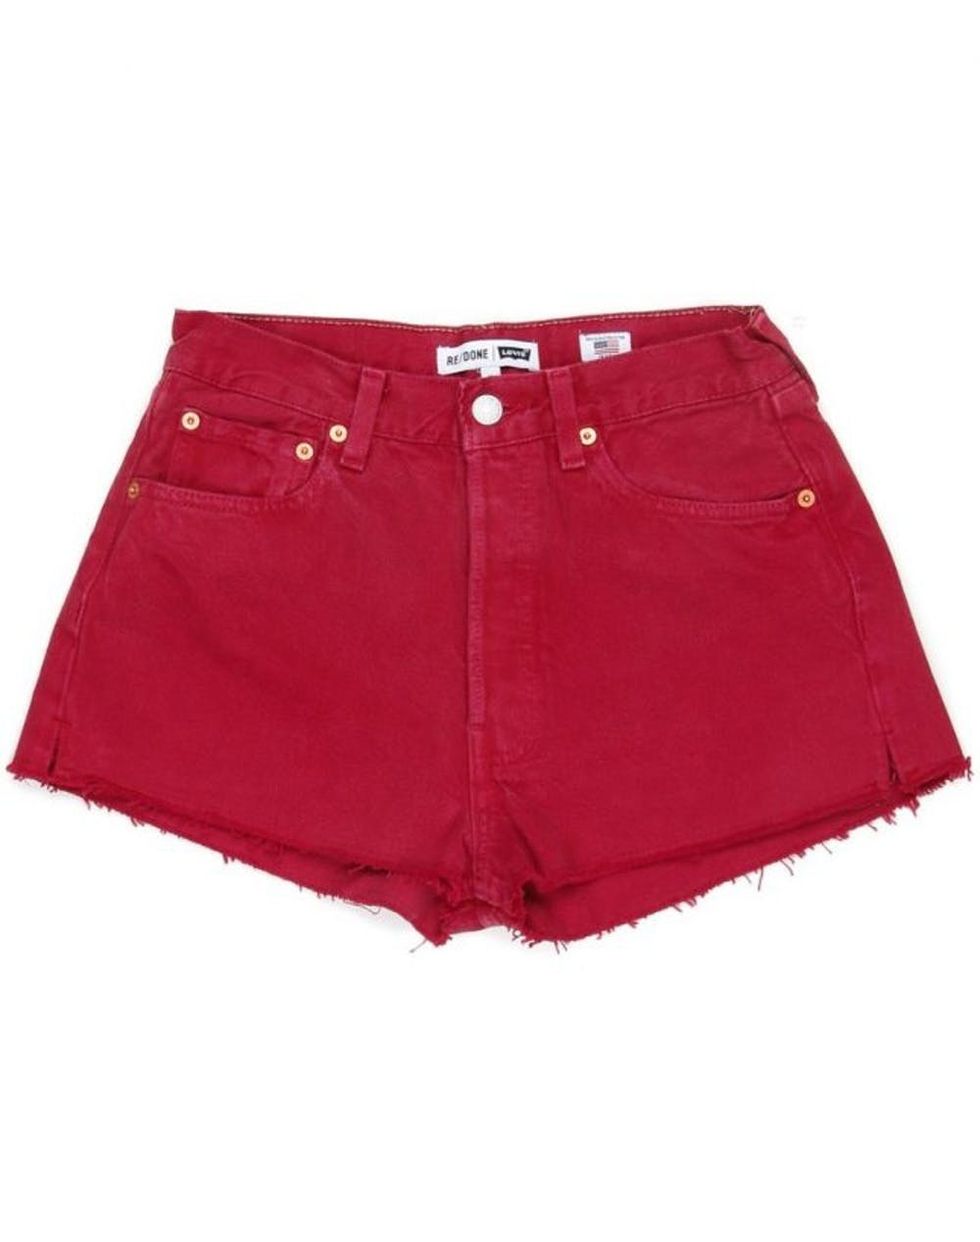 8 Ways to Get the Perfect Pair of Levis Cutoffs for Summer - Brit + Co